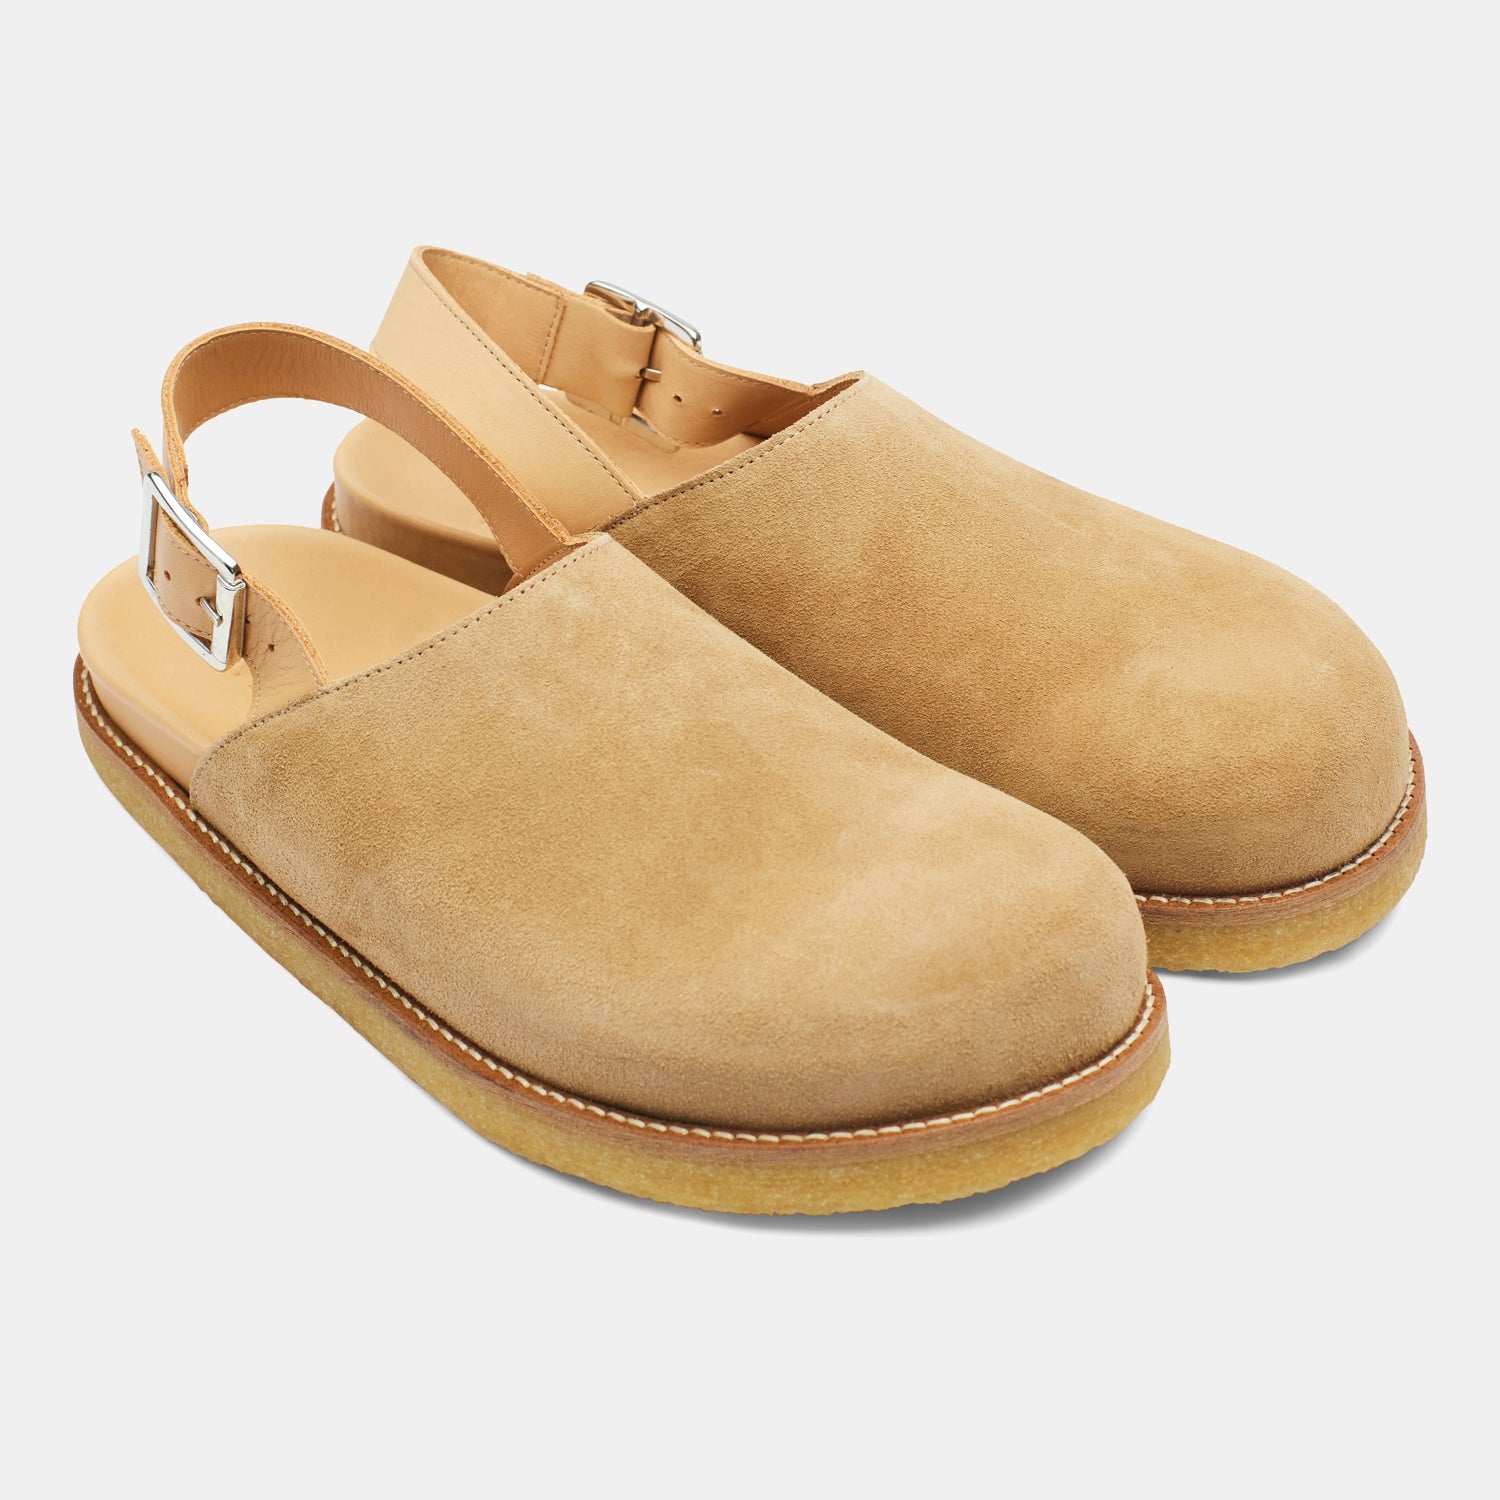 strapped mule in sand suede